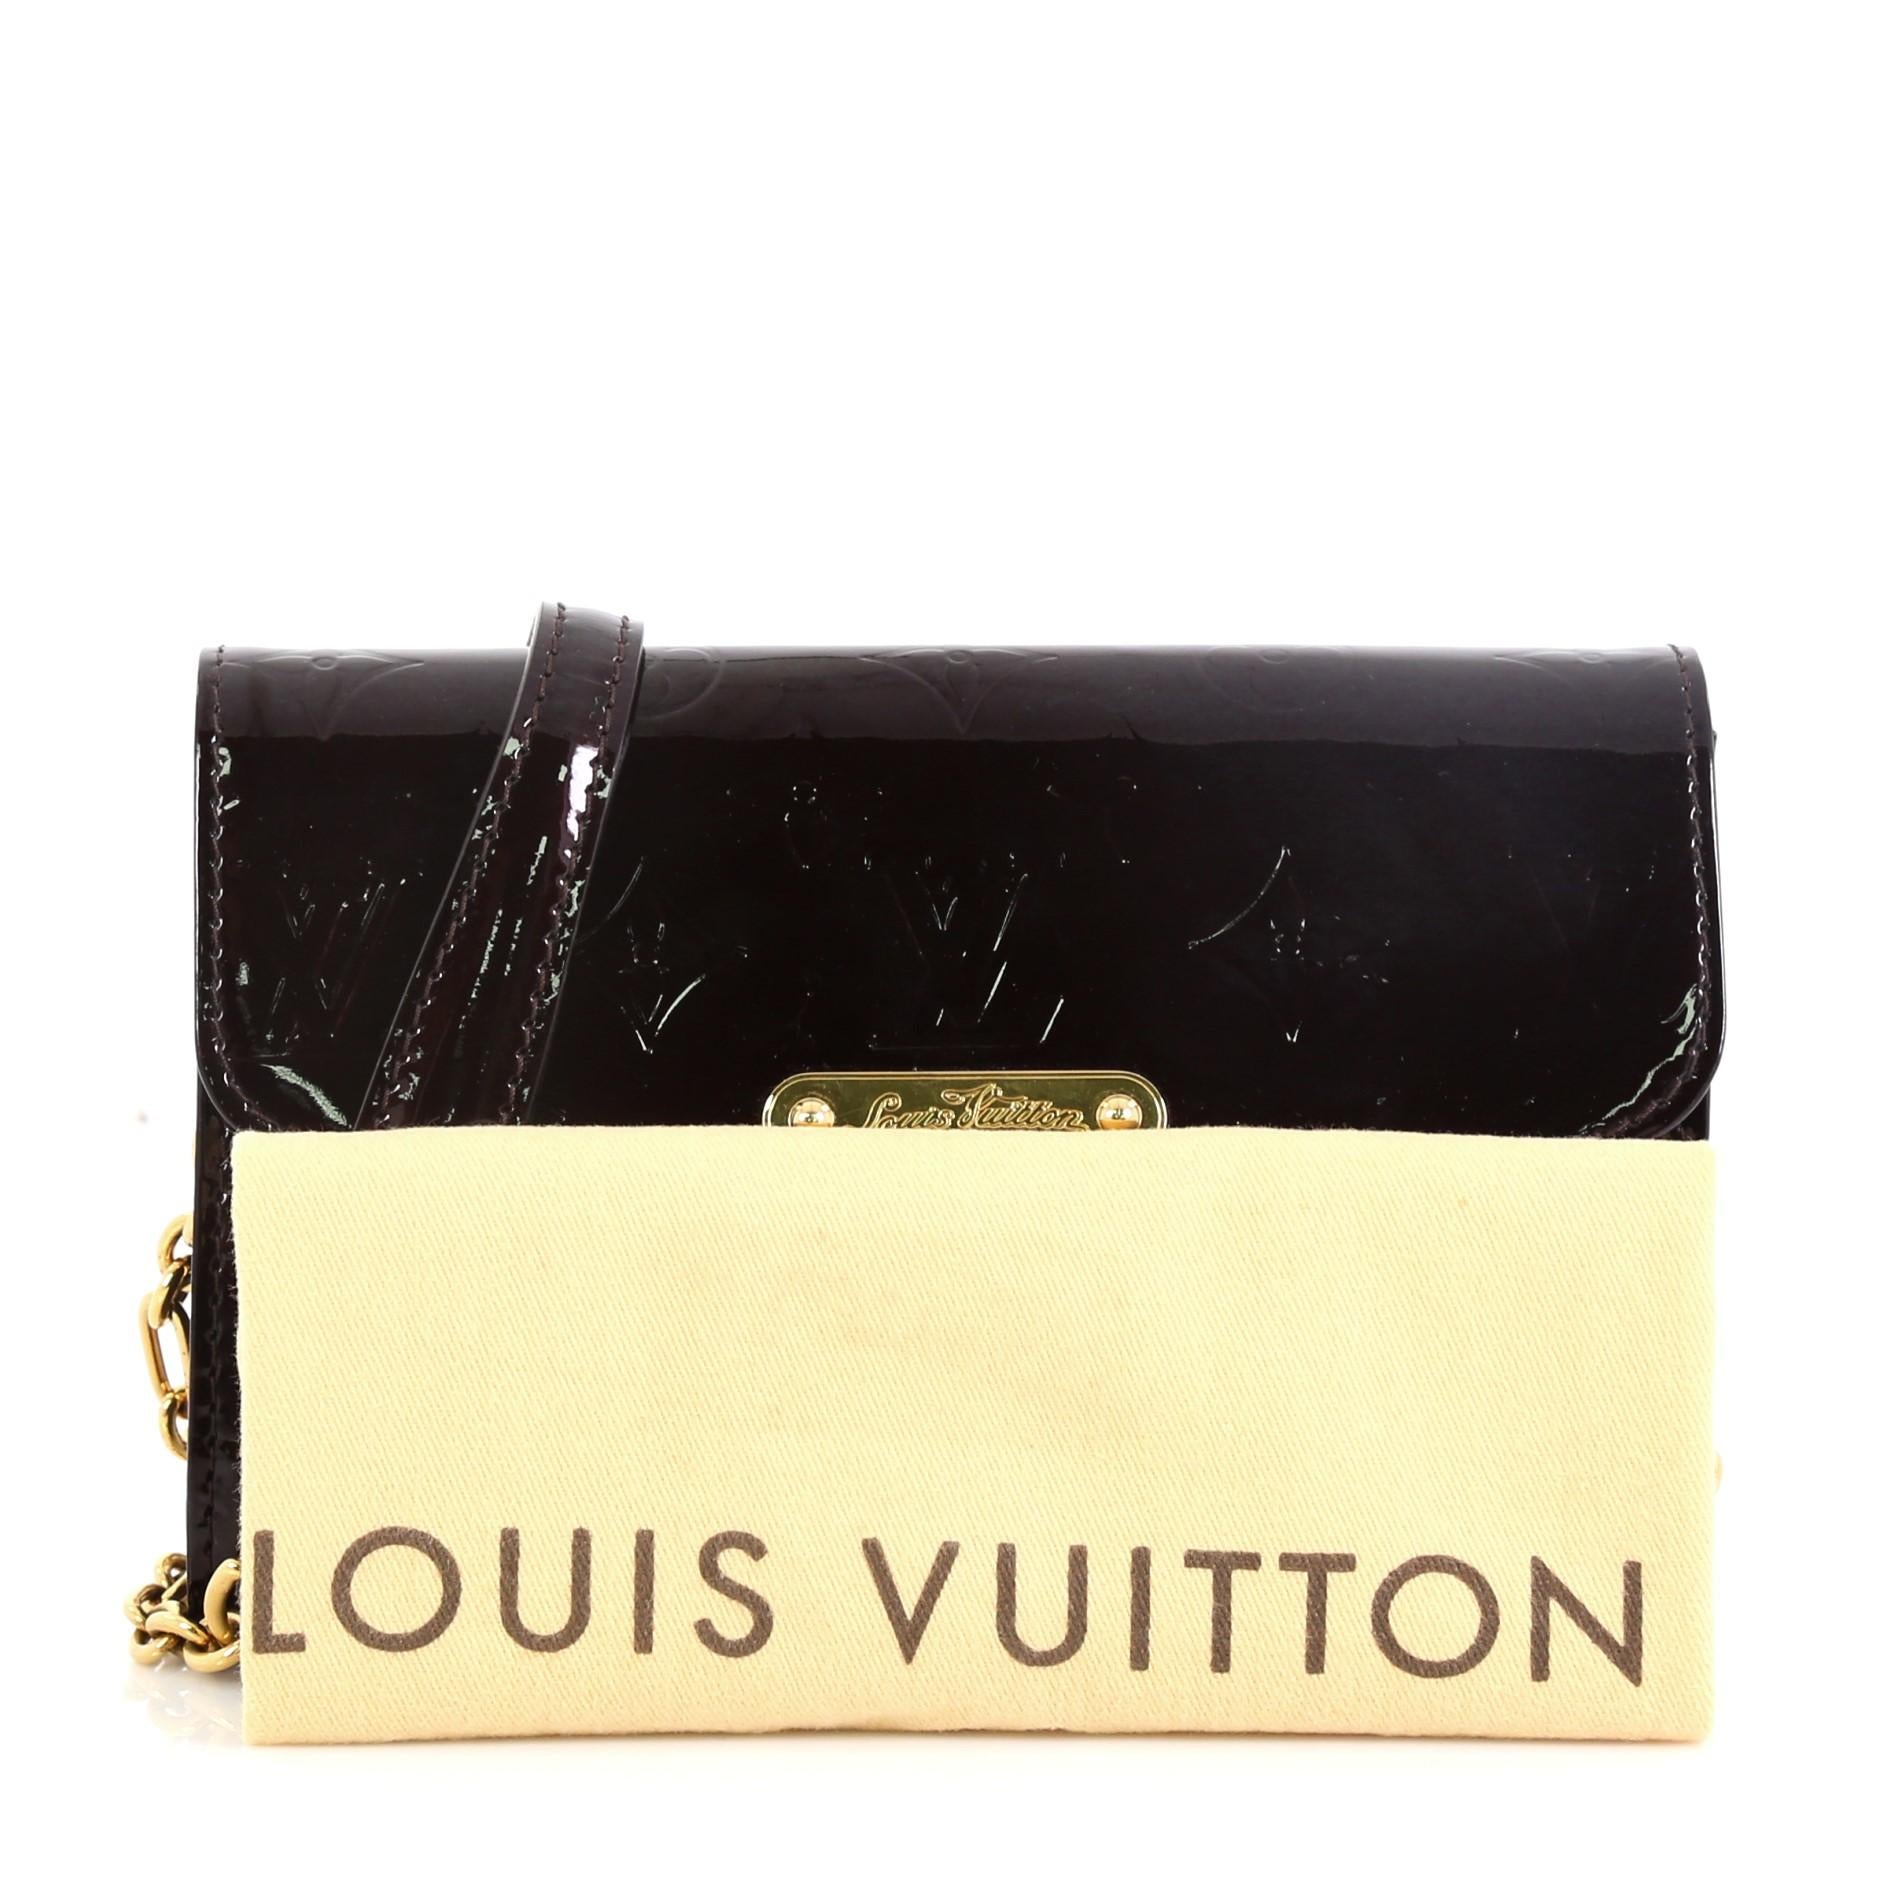 This Louis Vuitton Bel Air Pochette Monogram Vernis, crafted from purple monogram vernis leather, features a removable chain link shoulder strap with leather pad, and gold-tone hardware. Its magnetic snap button closure opens to a purple fabric